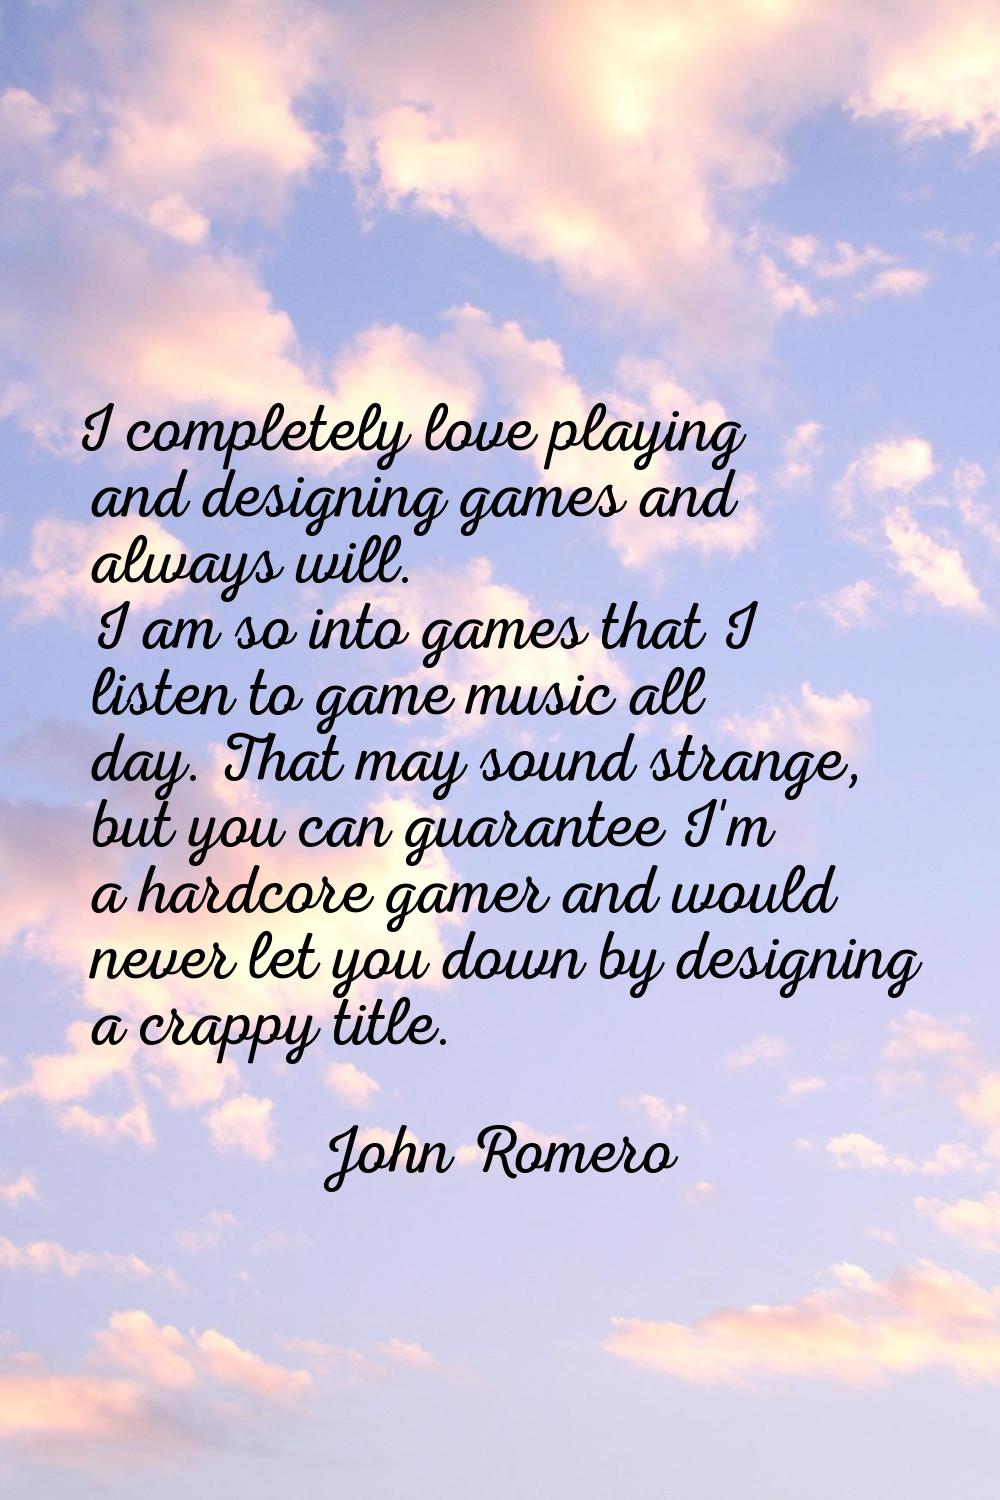 I completely love playing and designing games and always will. I am so into games that I listen to 